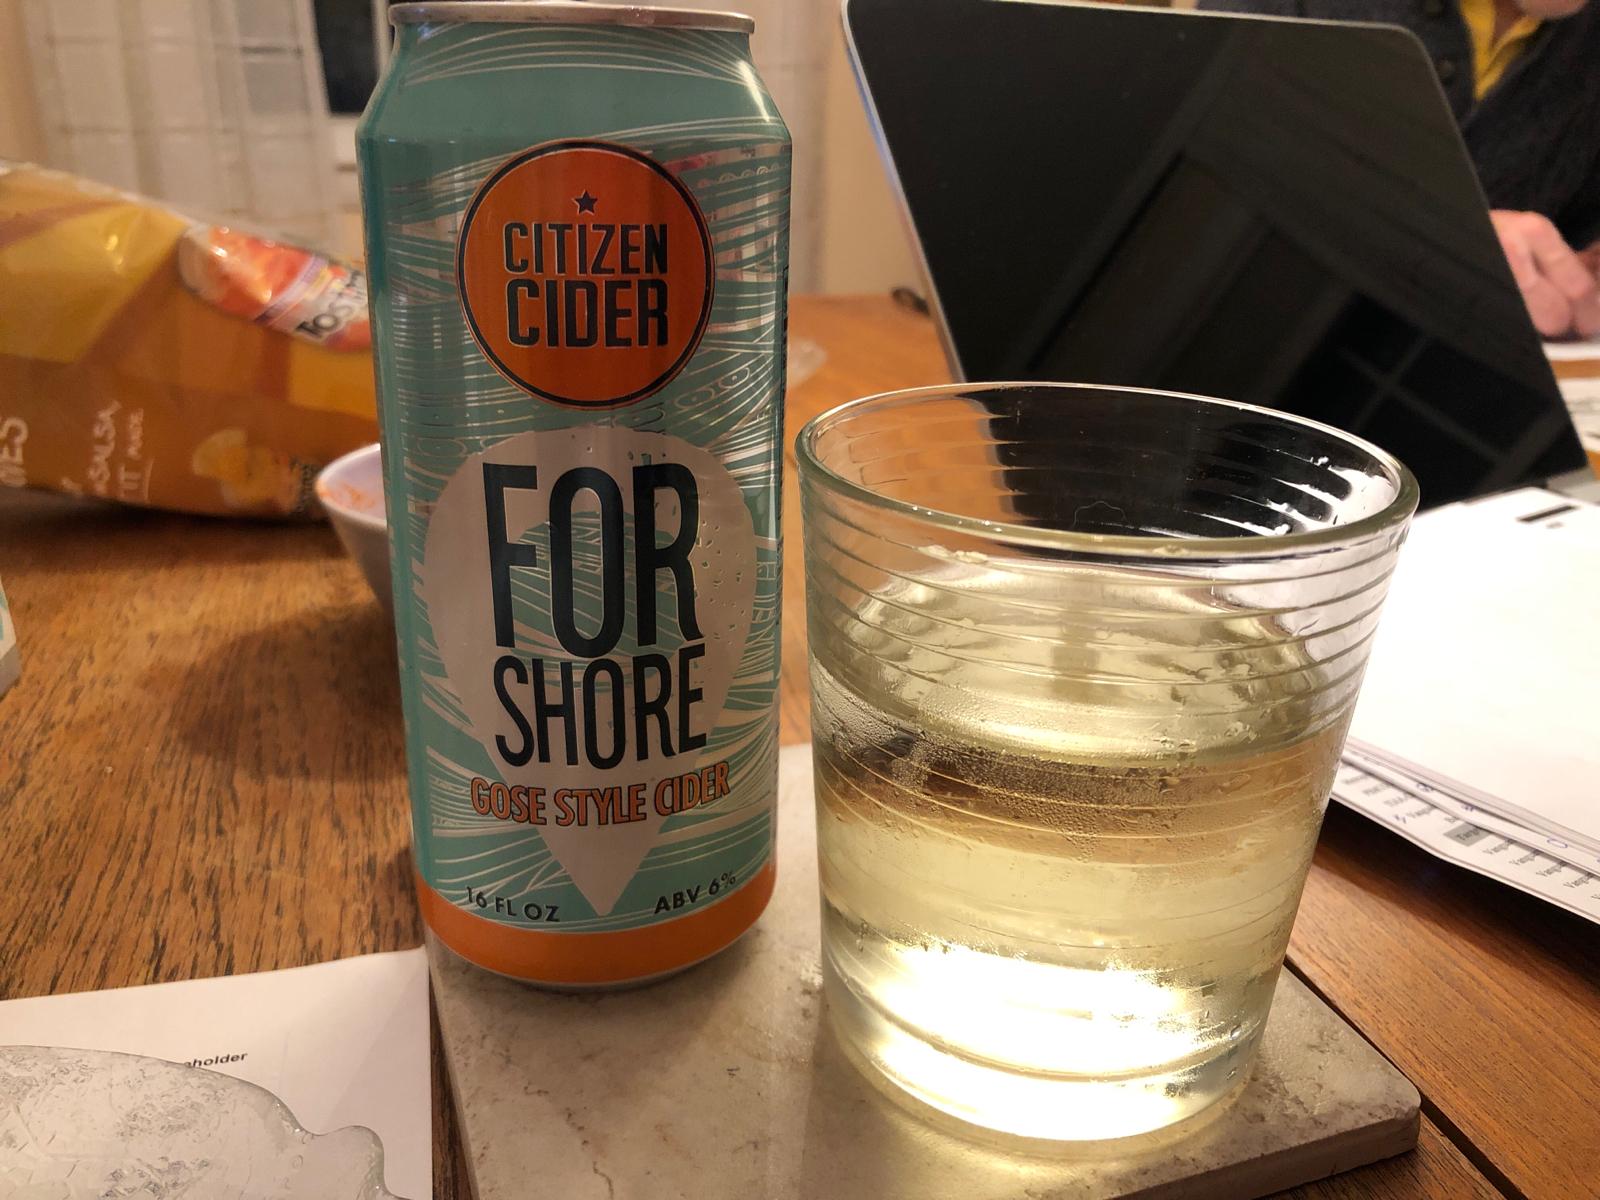 For Shore Gose Style Cider